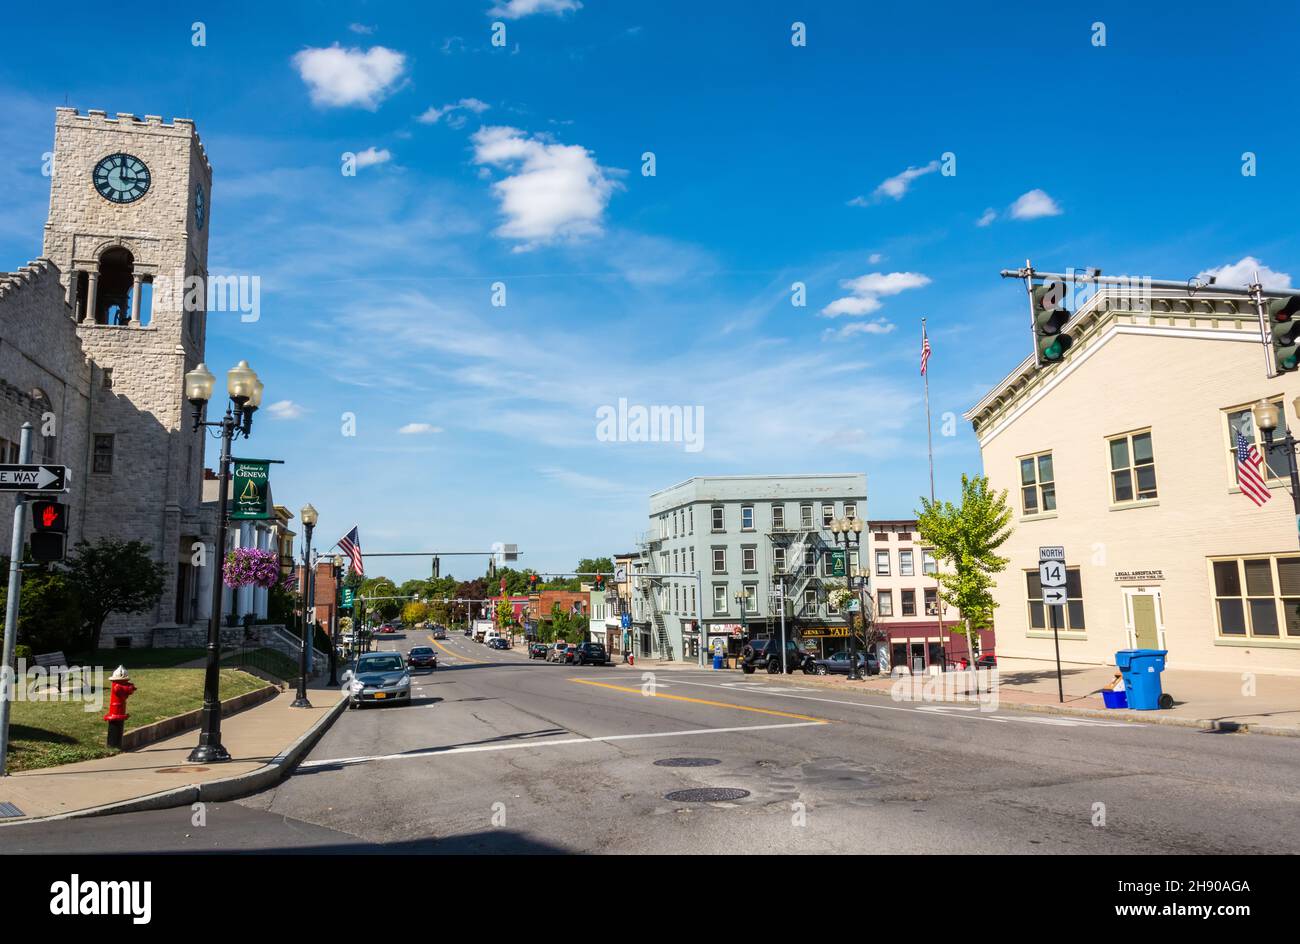 Geneva, New York, United States of America – September 13, 2016. Main Street in Geneva, NY. View with the First United Methodist Church, commercial an Stock Photo